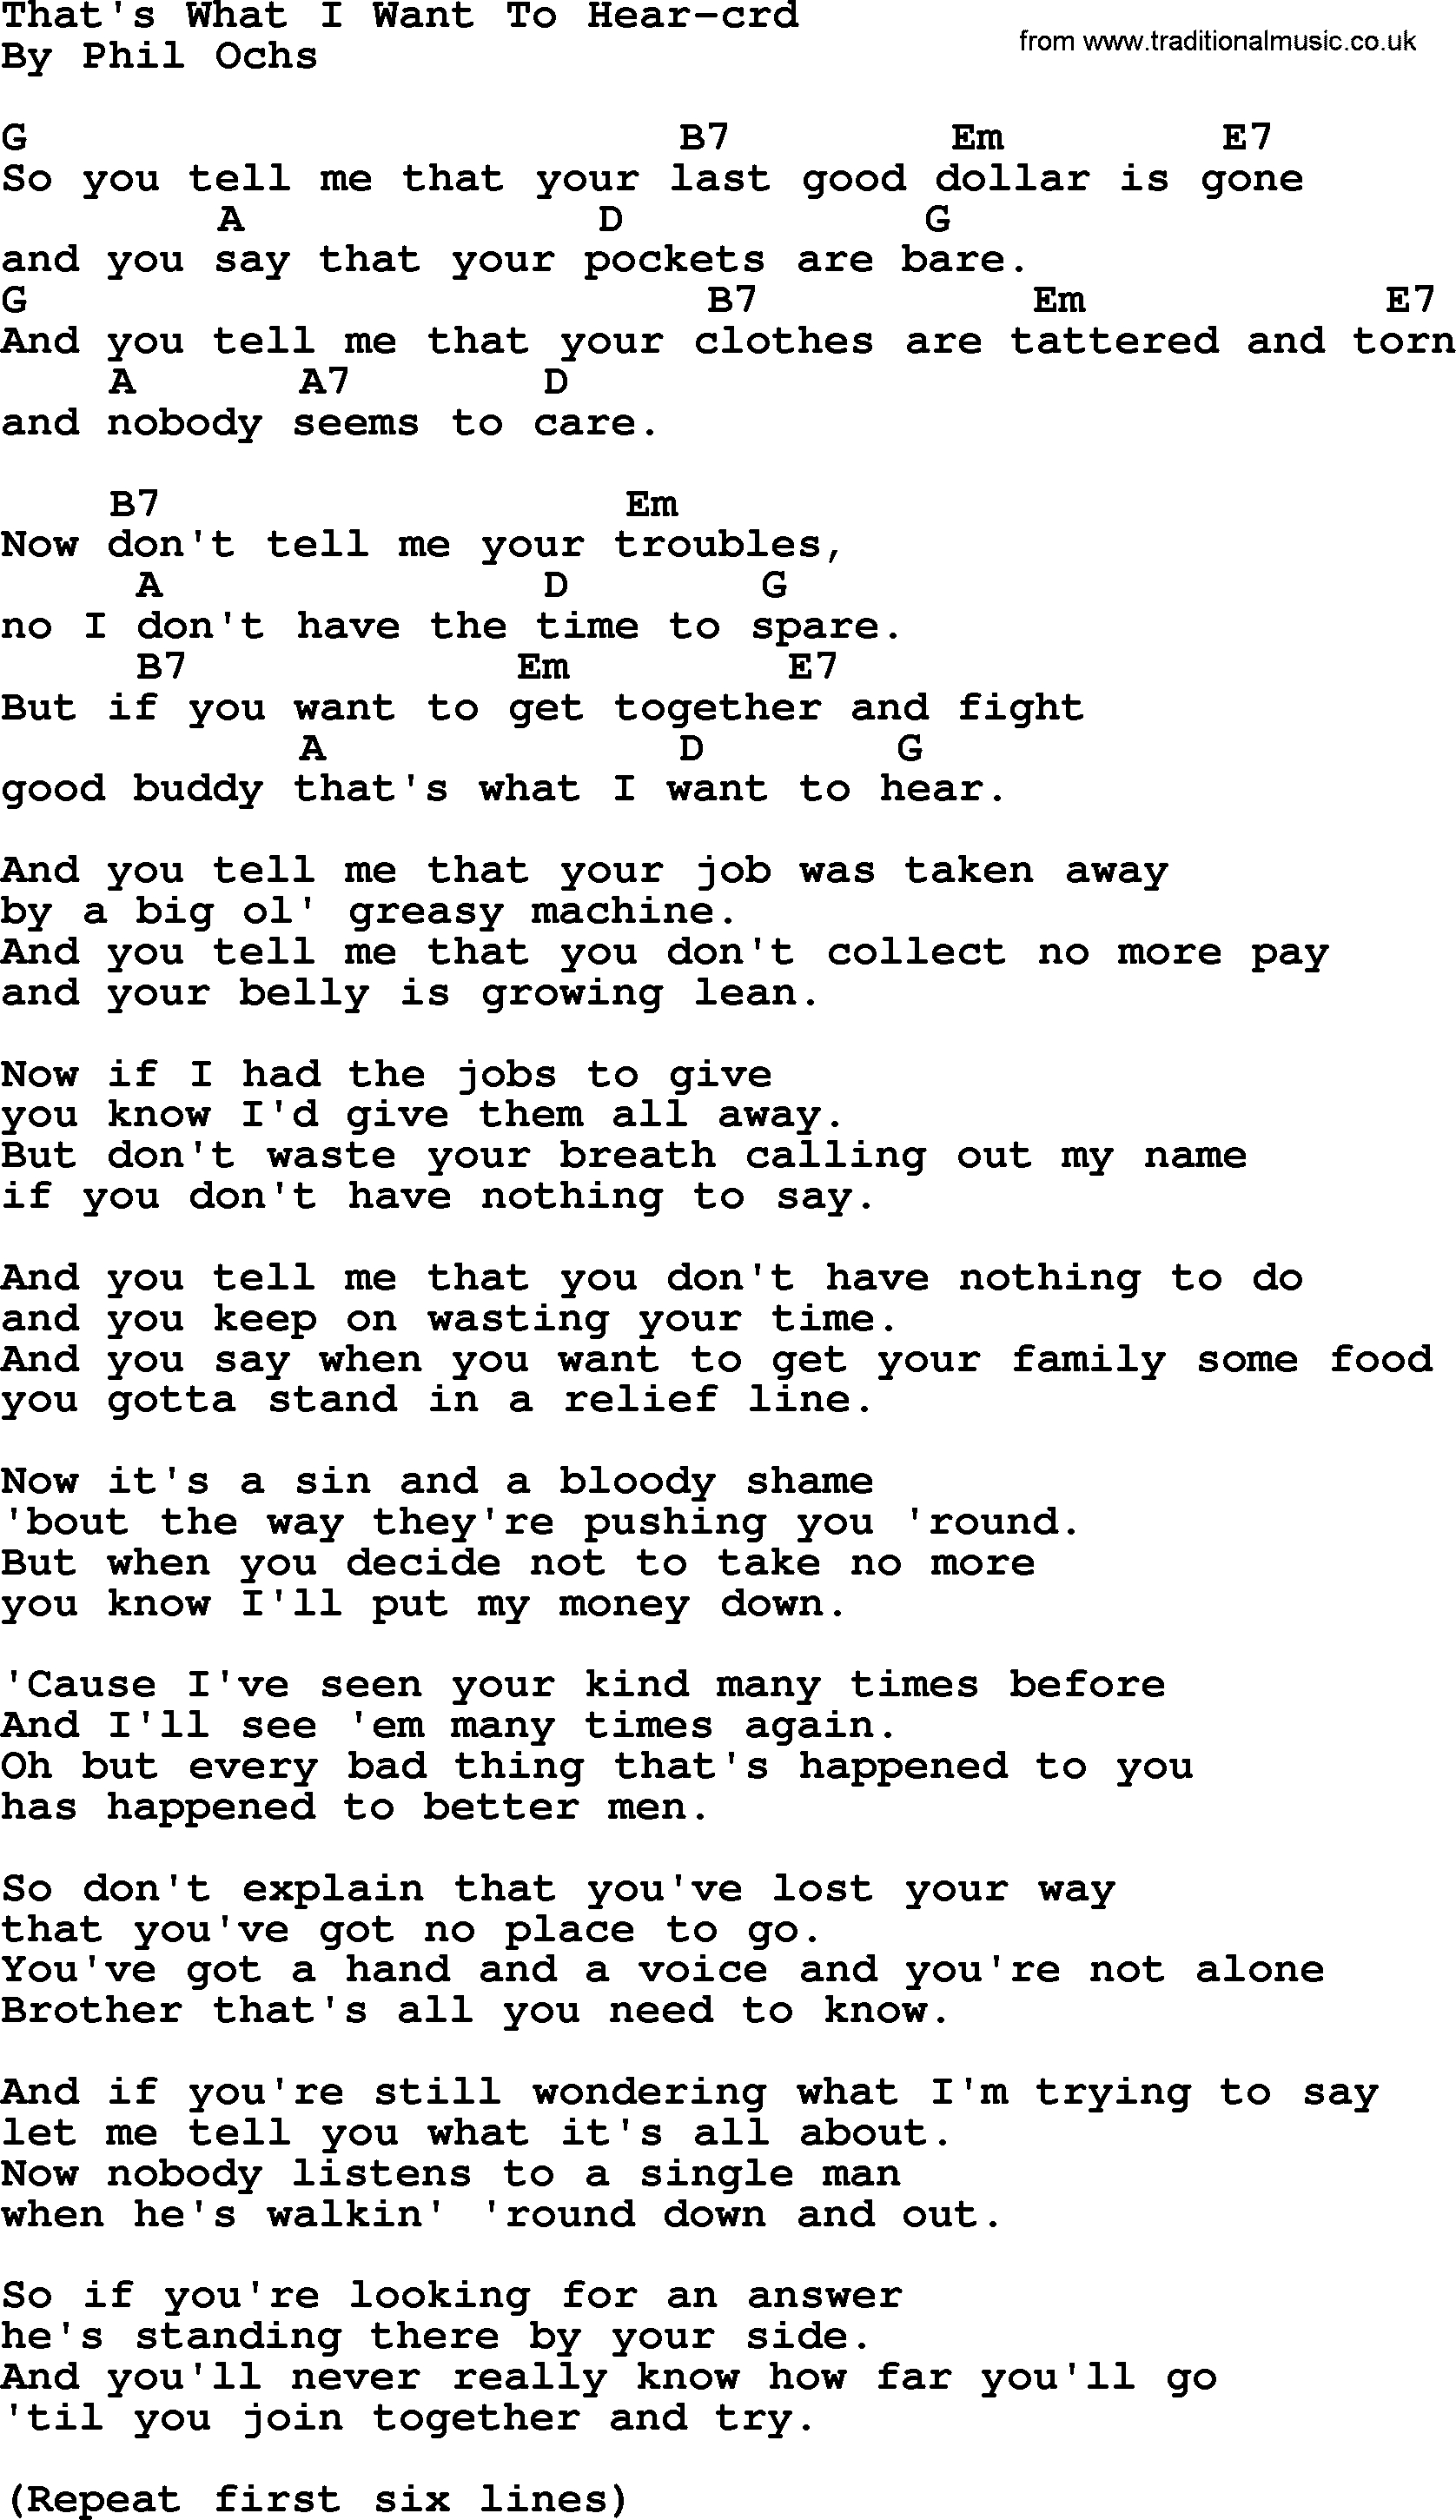 All I Want Chords Phil Ochs Song Thats What I Want To Hear Lyrics And Chords